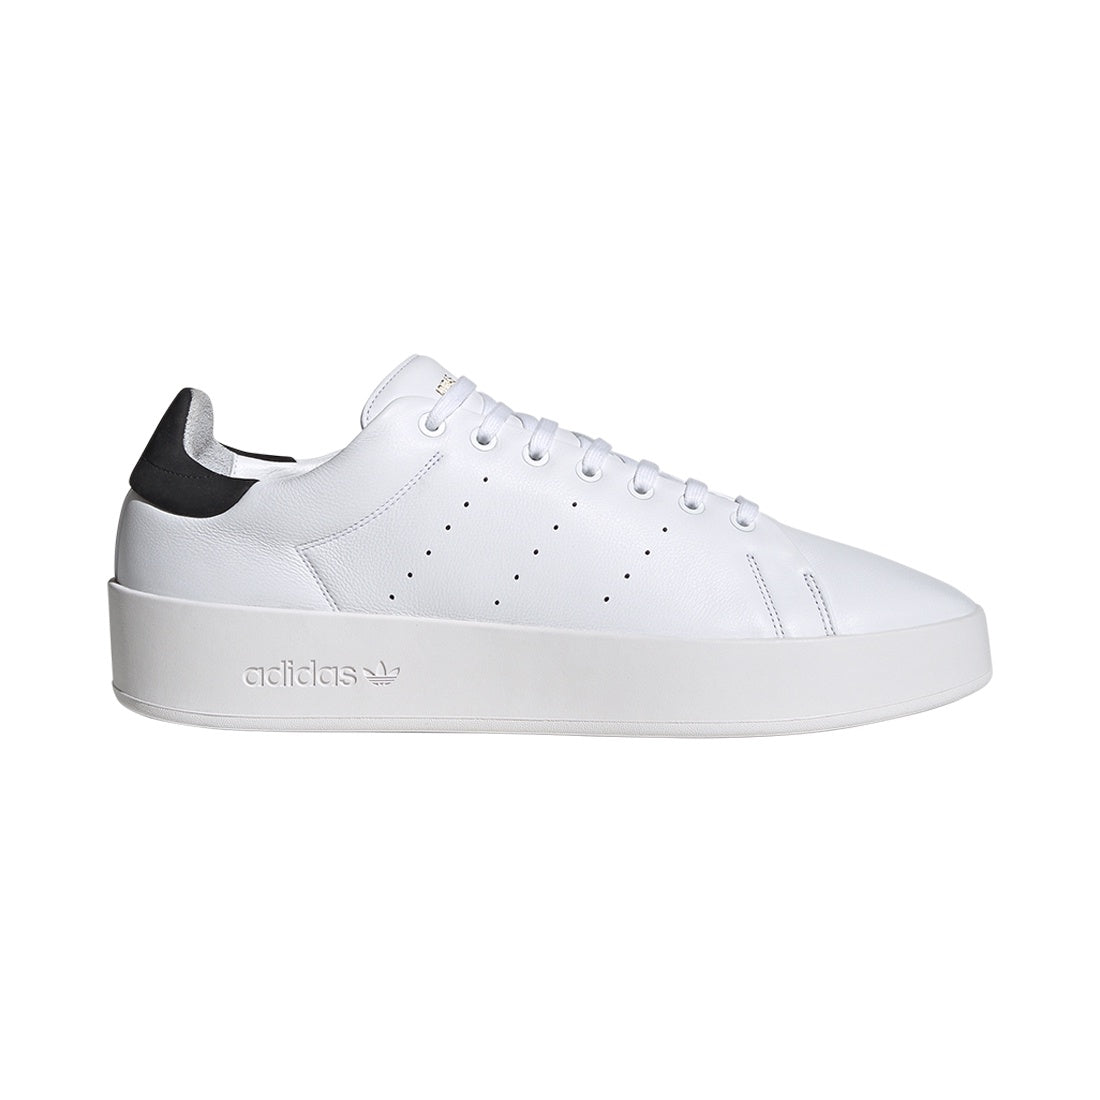 STAN SMITH RELASTED FTWR WHITE